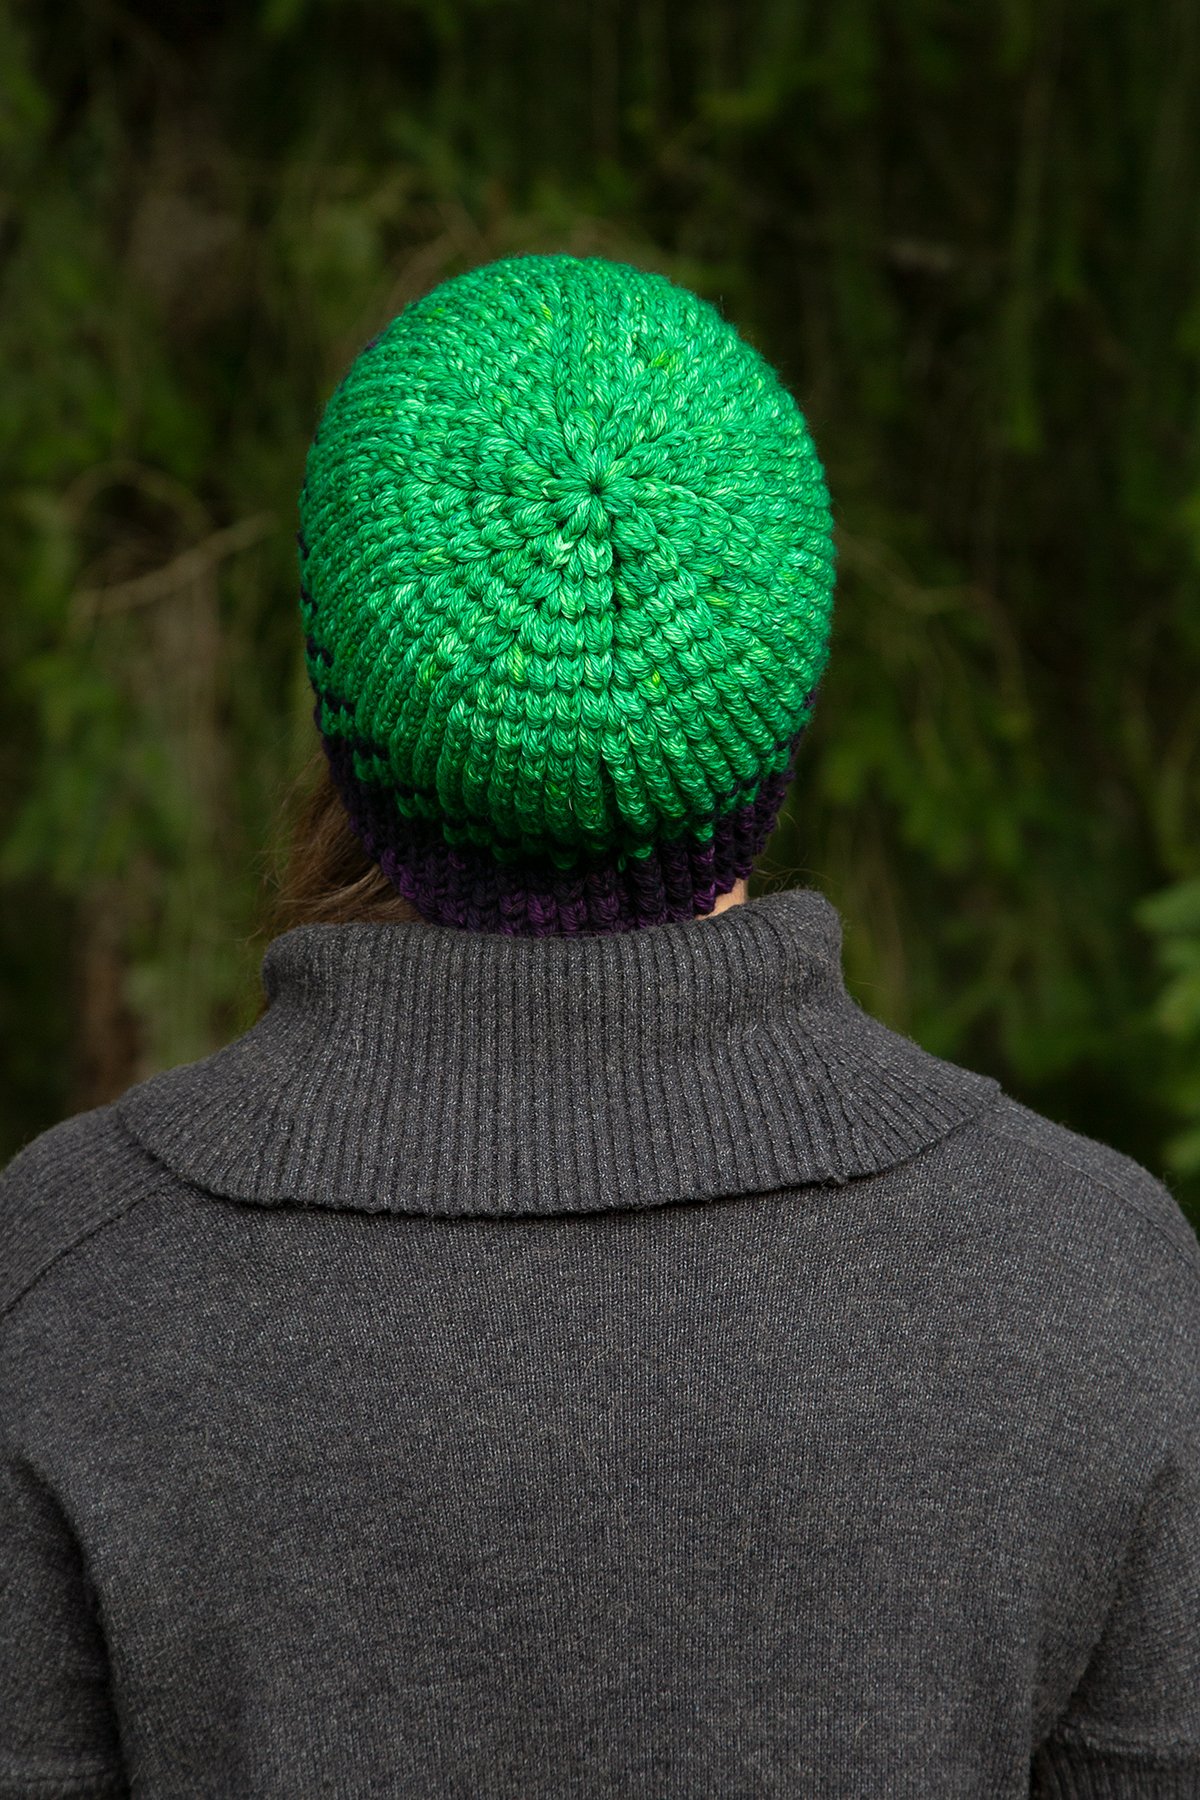 A person faces away, showing the back and crown of the Yarn Dragon Beanie on their head.